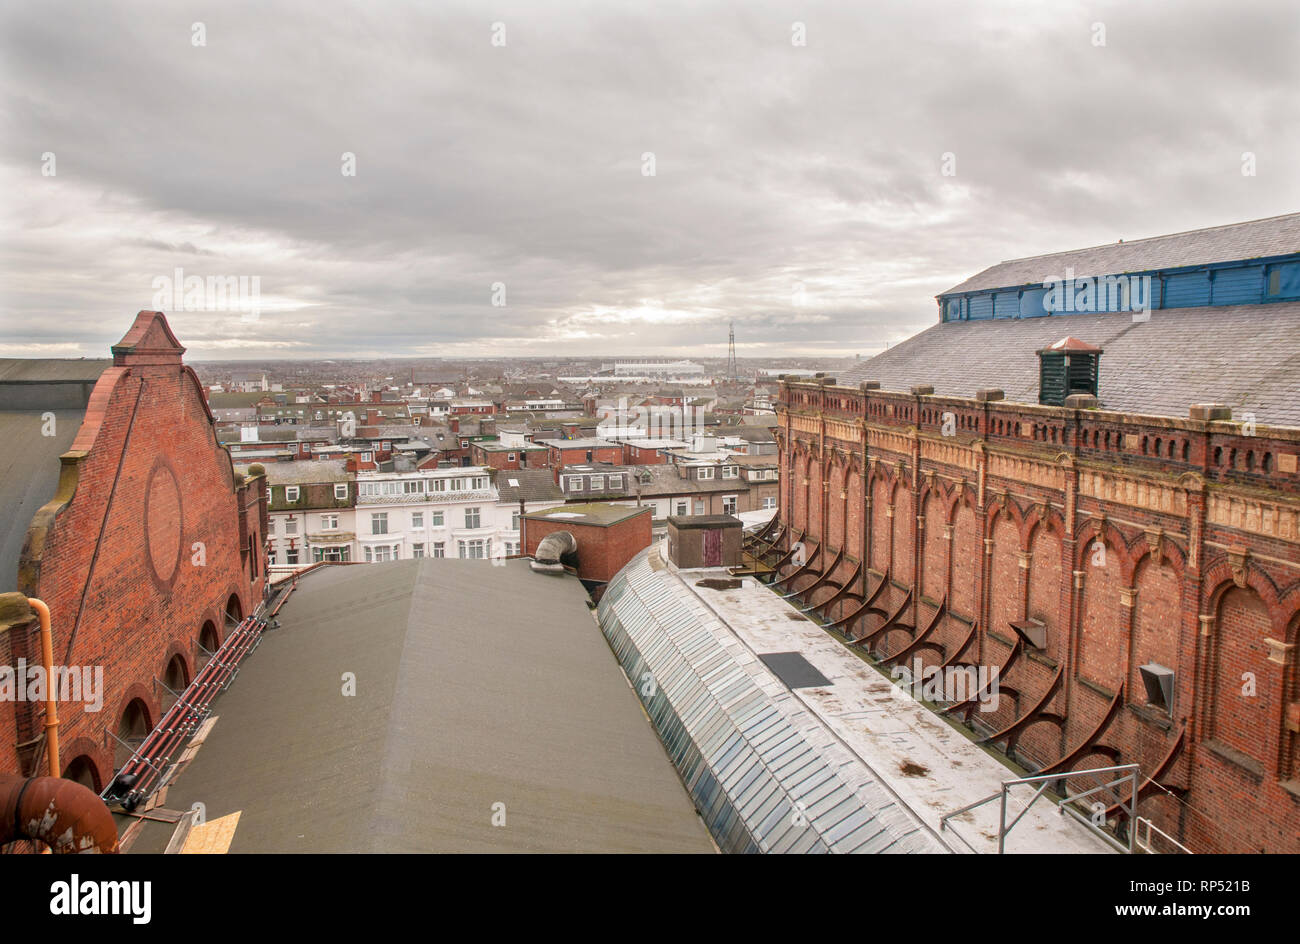 View looking south over Blackpool from top of the Opera House in the Winter Gardens building  Glass top of Winter Gardens pavilion seen on lower right Stock Photo